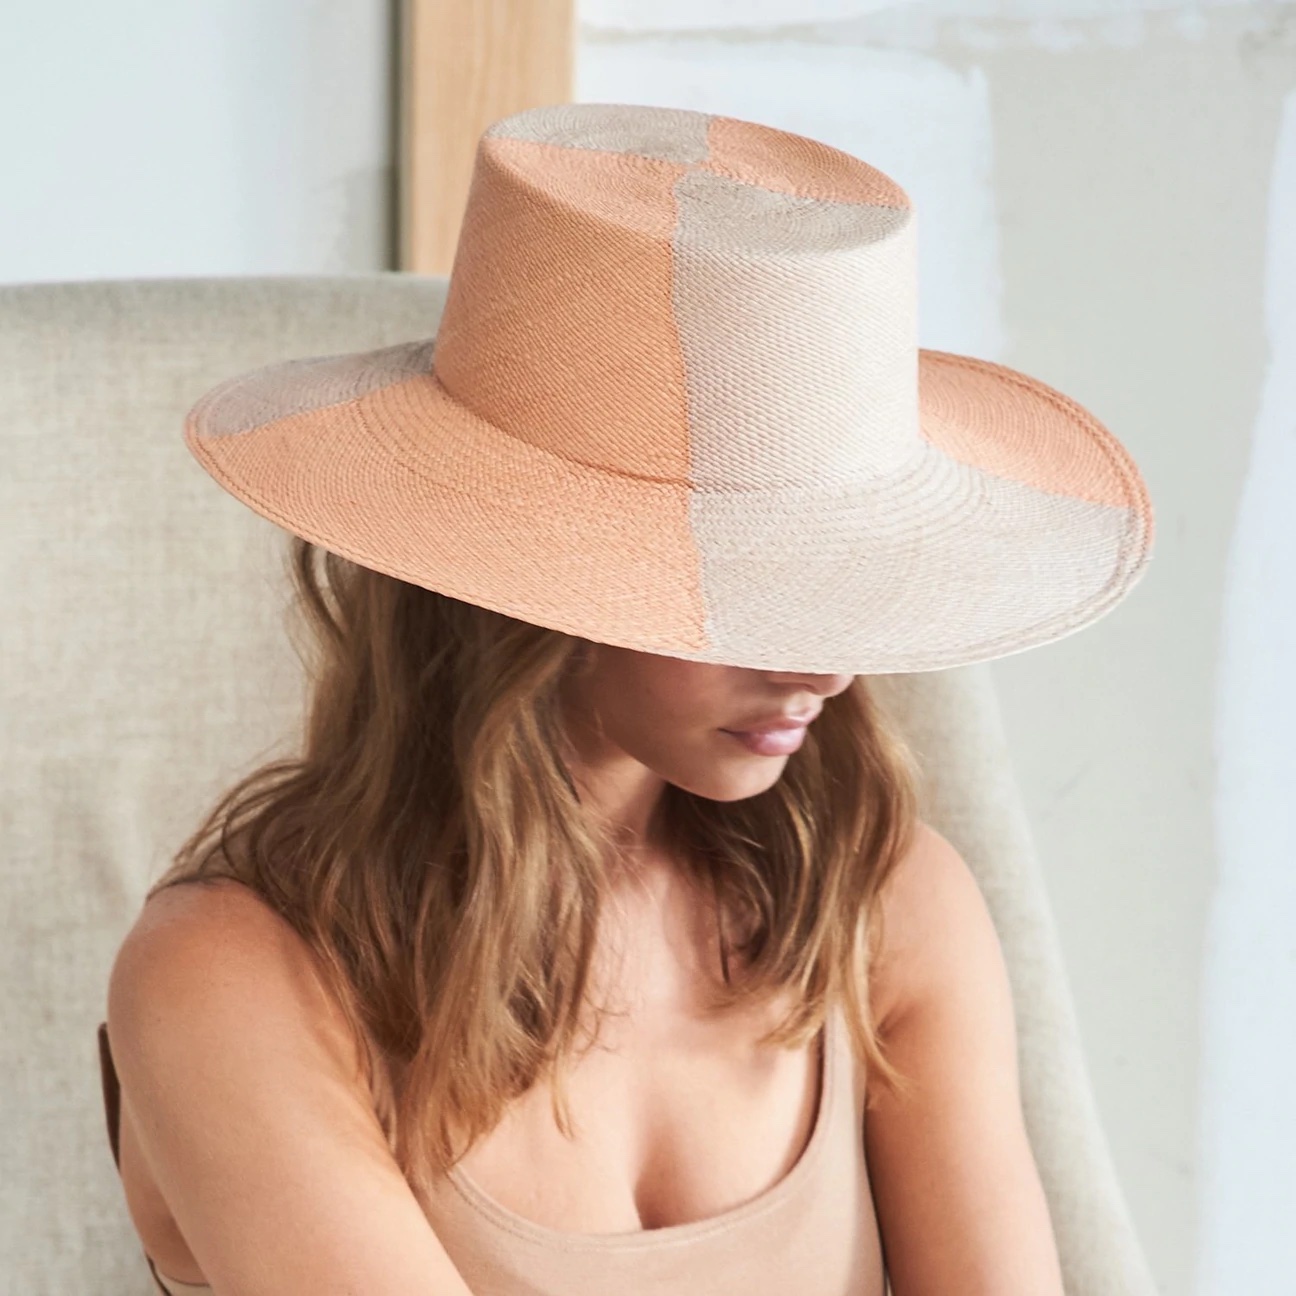 Handwoven straw sun hat keeps your face and neck safe while waiting in lines at food festivals.